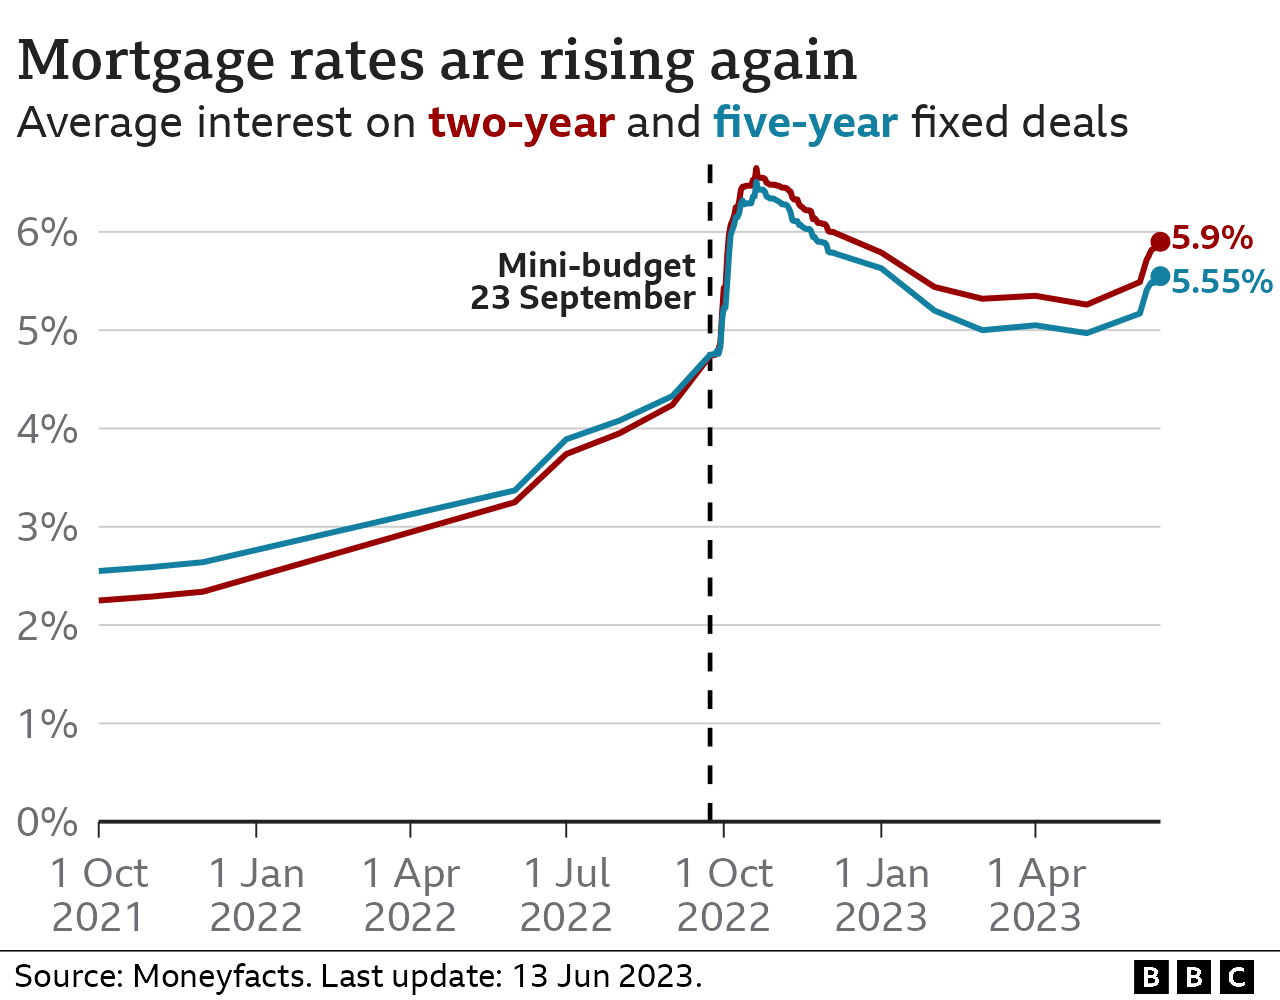 Line chart showing the average interest rate charged on two-year and five-year fixed deals. The two-year rate was 5.9% on 13 Jun 2023, and it peaked at 6.65% in October 2022. The five-year rate was 5.55%, and it peaked at 6.51%.